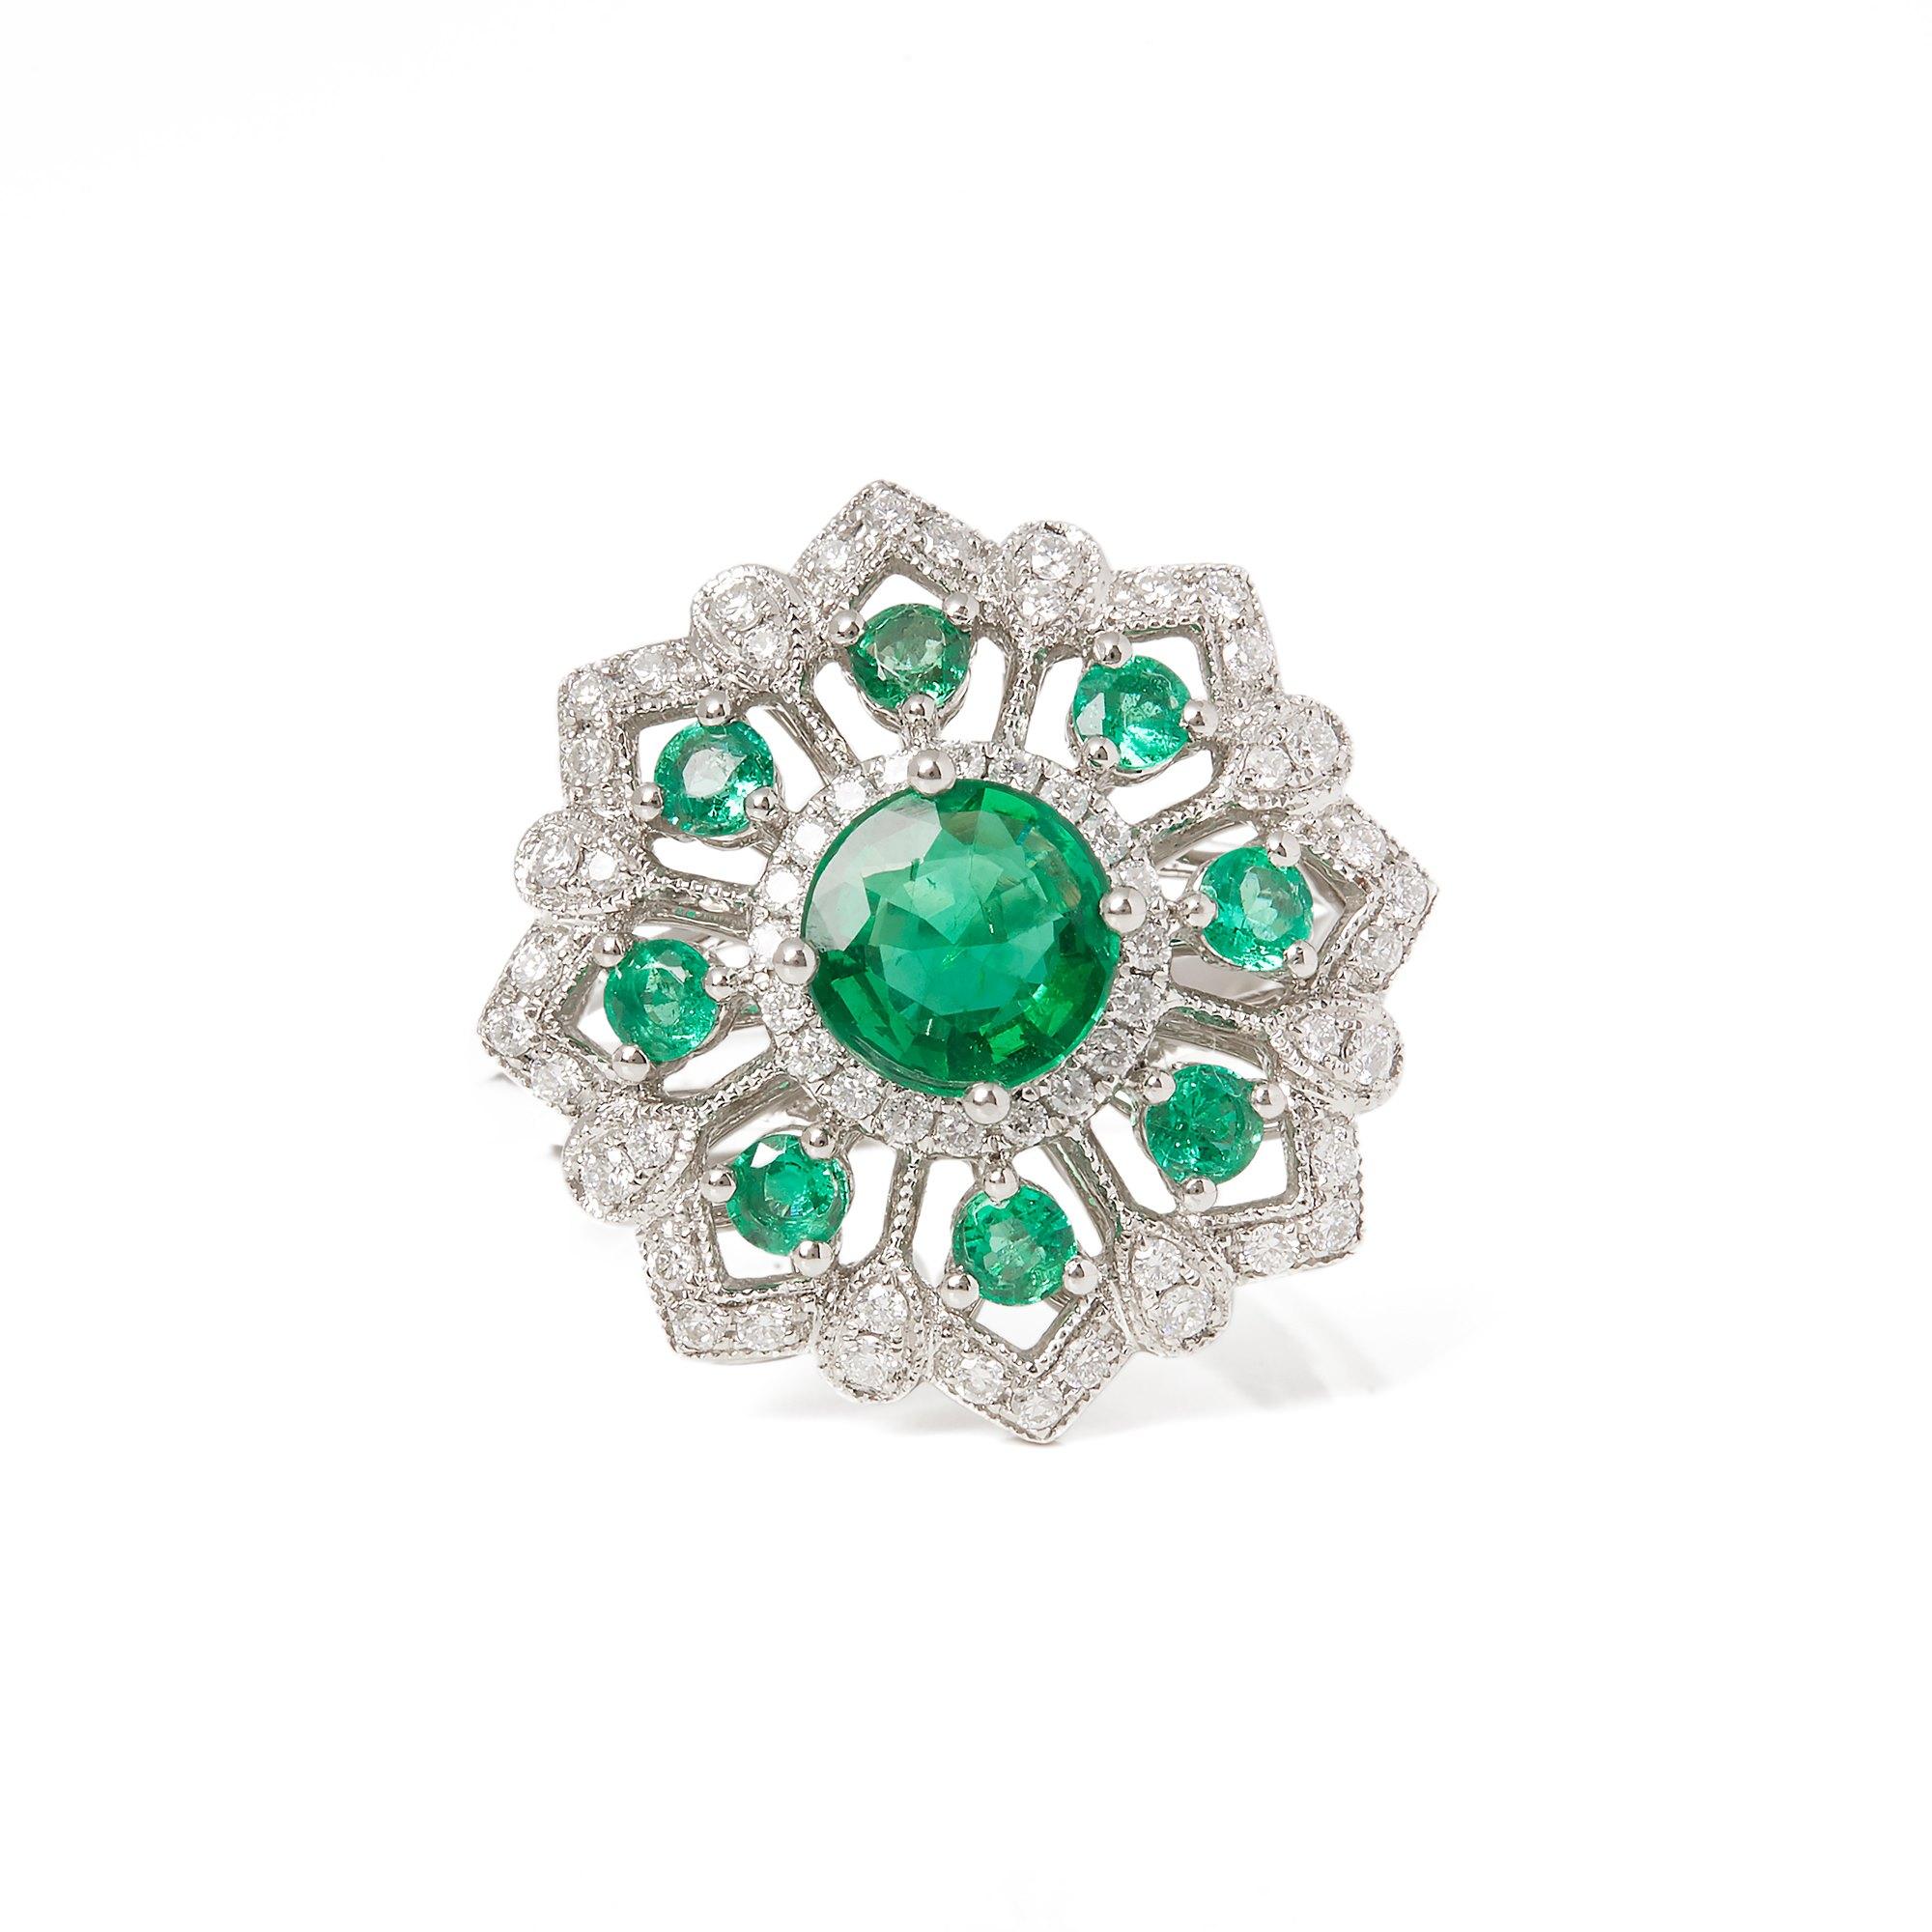 This ring designed by David Jerome is from his private collection and features one round cut Emerald totalling 1.32cts sourced in the chivor mine Columbia. Set with round brilliant cut Diamonds totalling 0.35cts mounted in a platinum setting. Finger